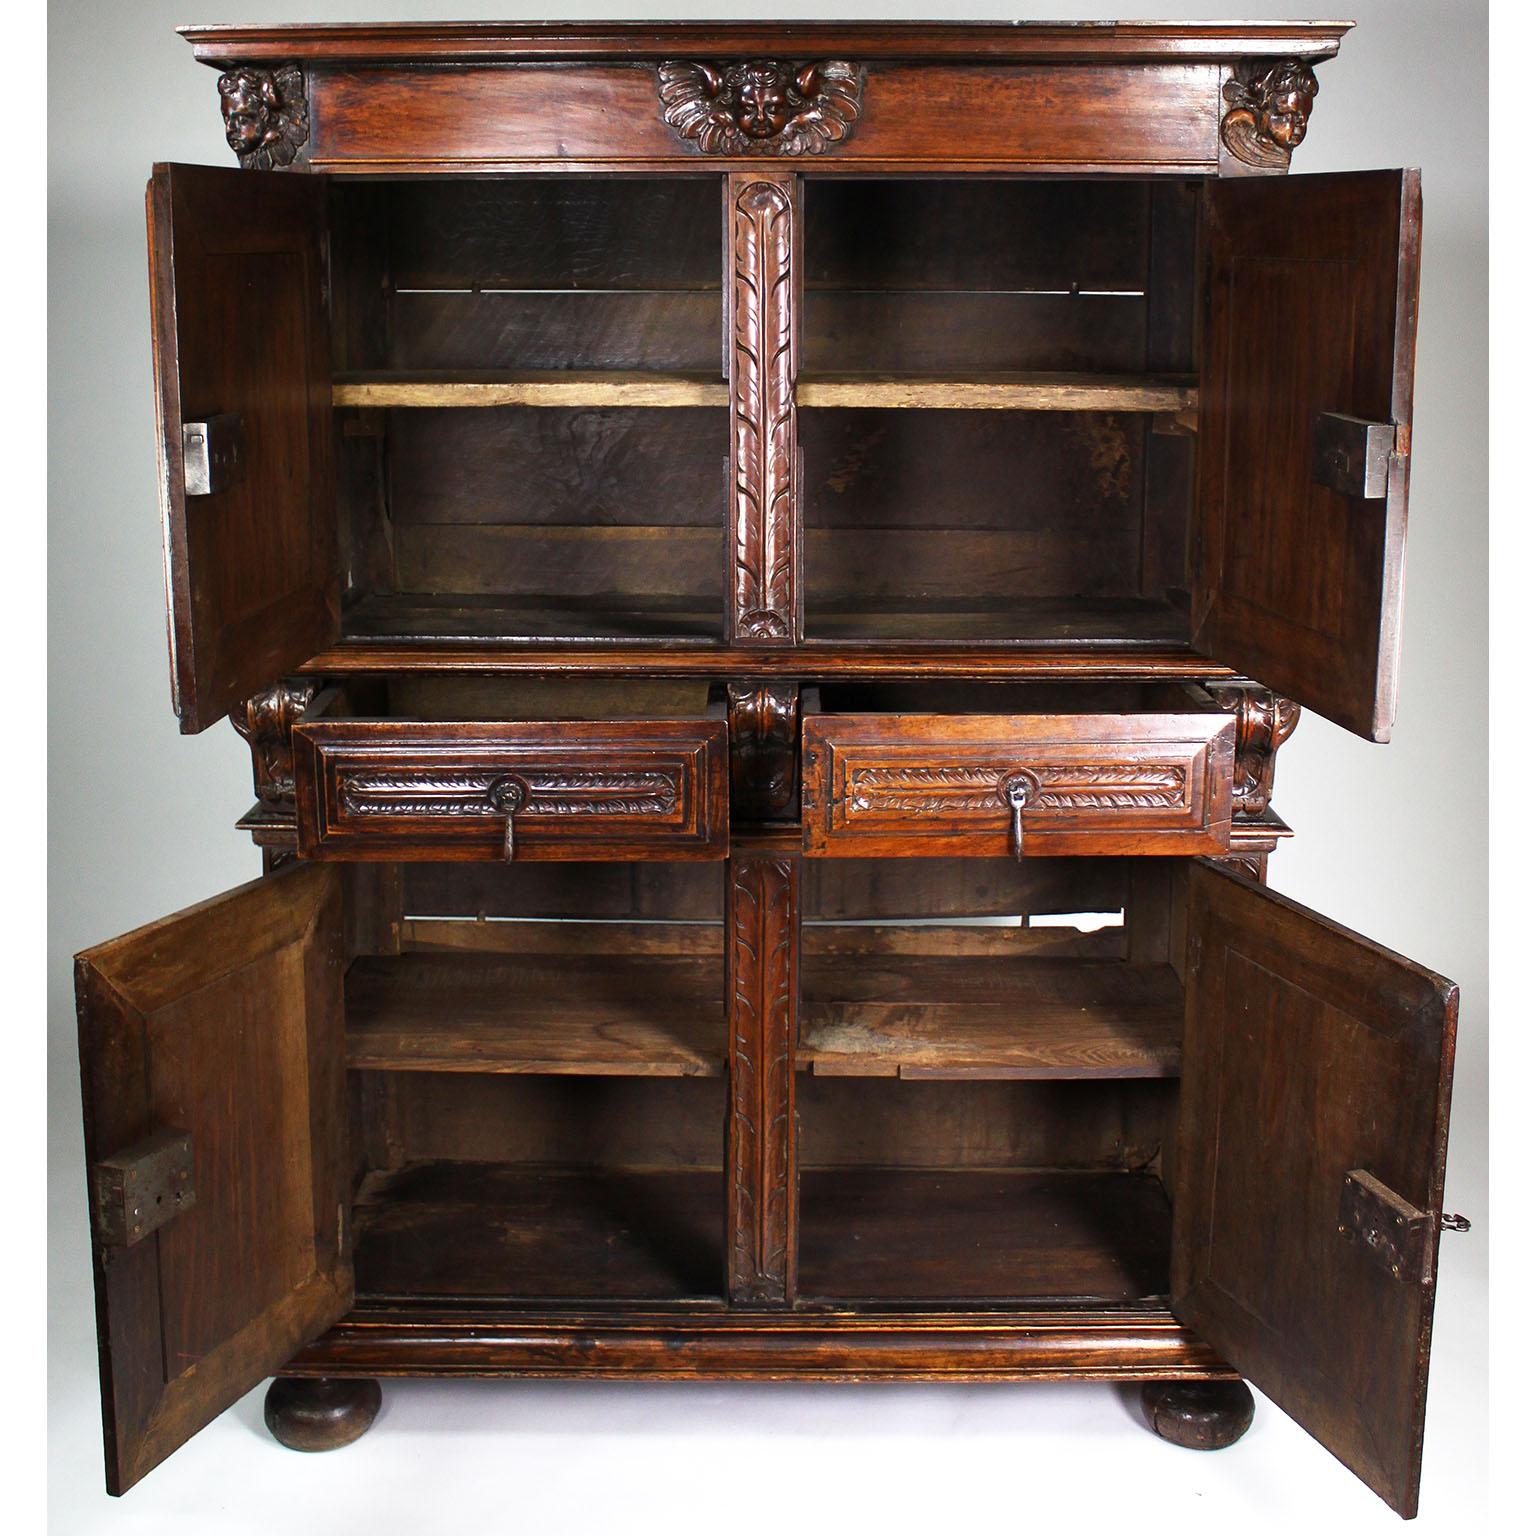 Hand-Carved A 17th-18th Century French/Italian Renaissance Walnut Carved Credenza Cabinet For Sale